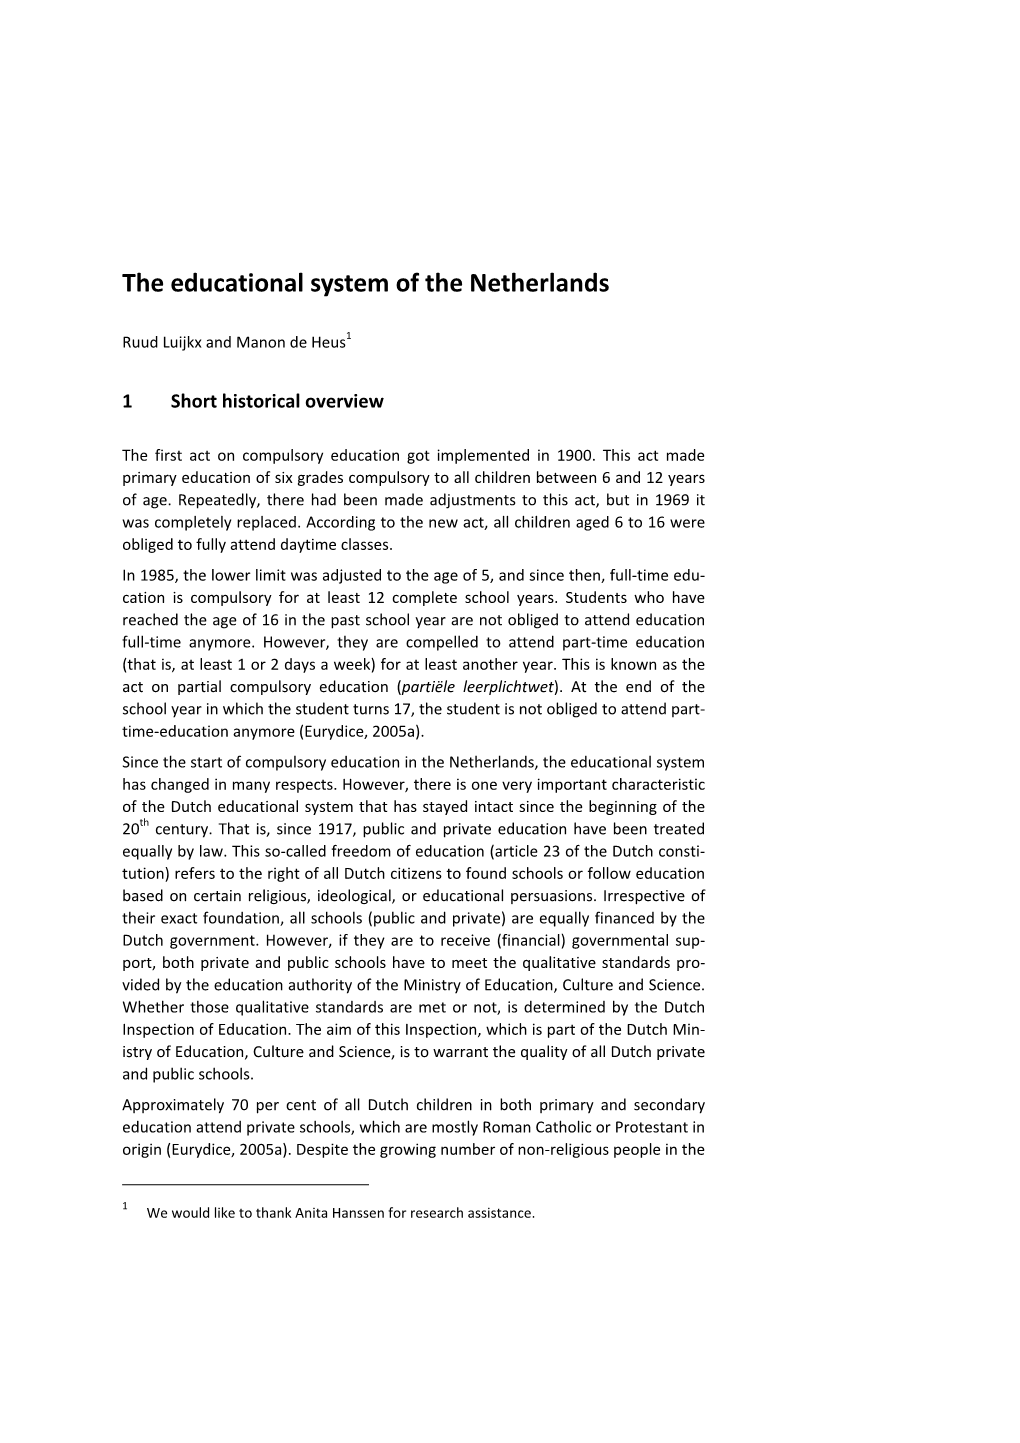 The Educational System of the Netherlands